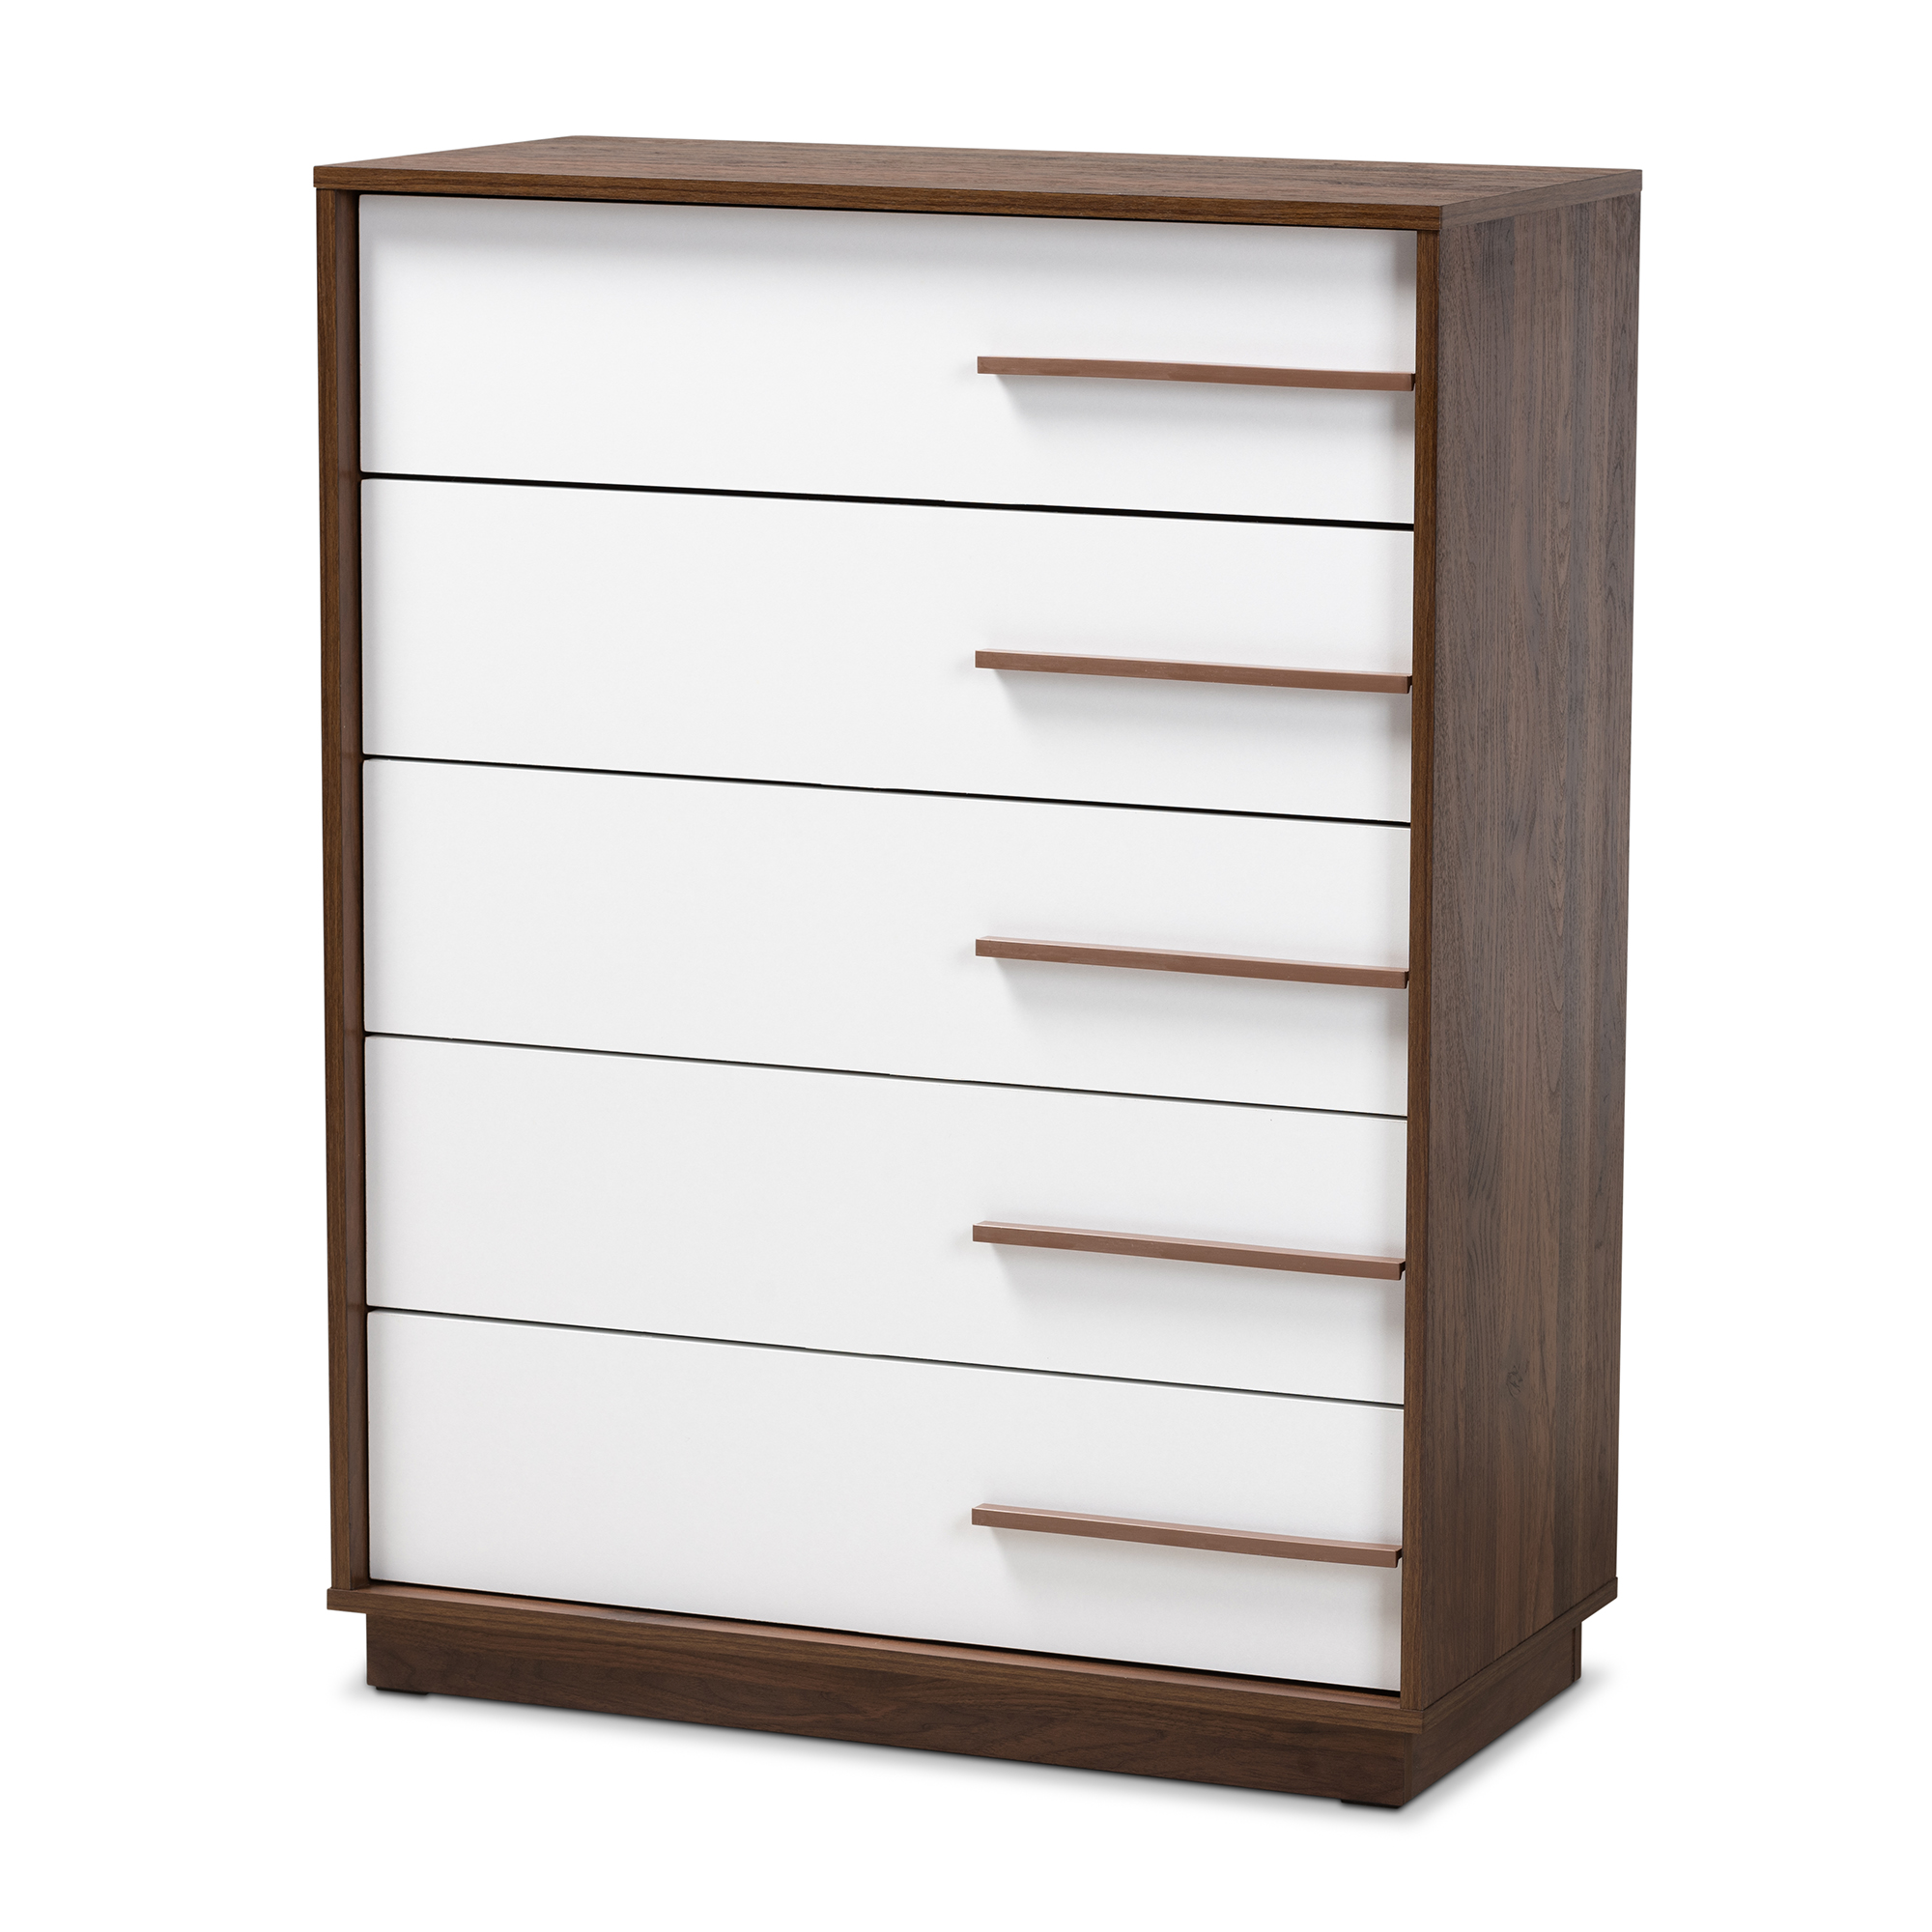 Baxton Studio Mette Mid-Century Modern Two-Tone White and Walnut Finished 5-Drawer Wood Chest